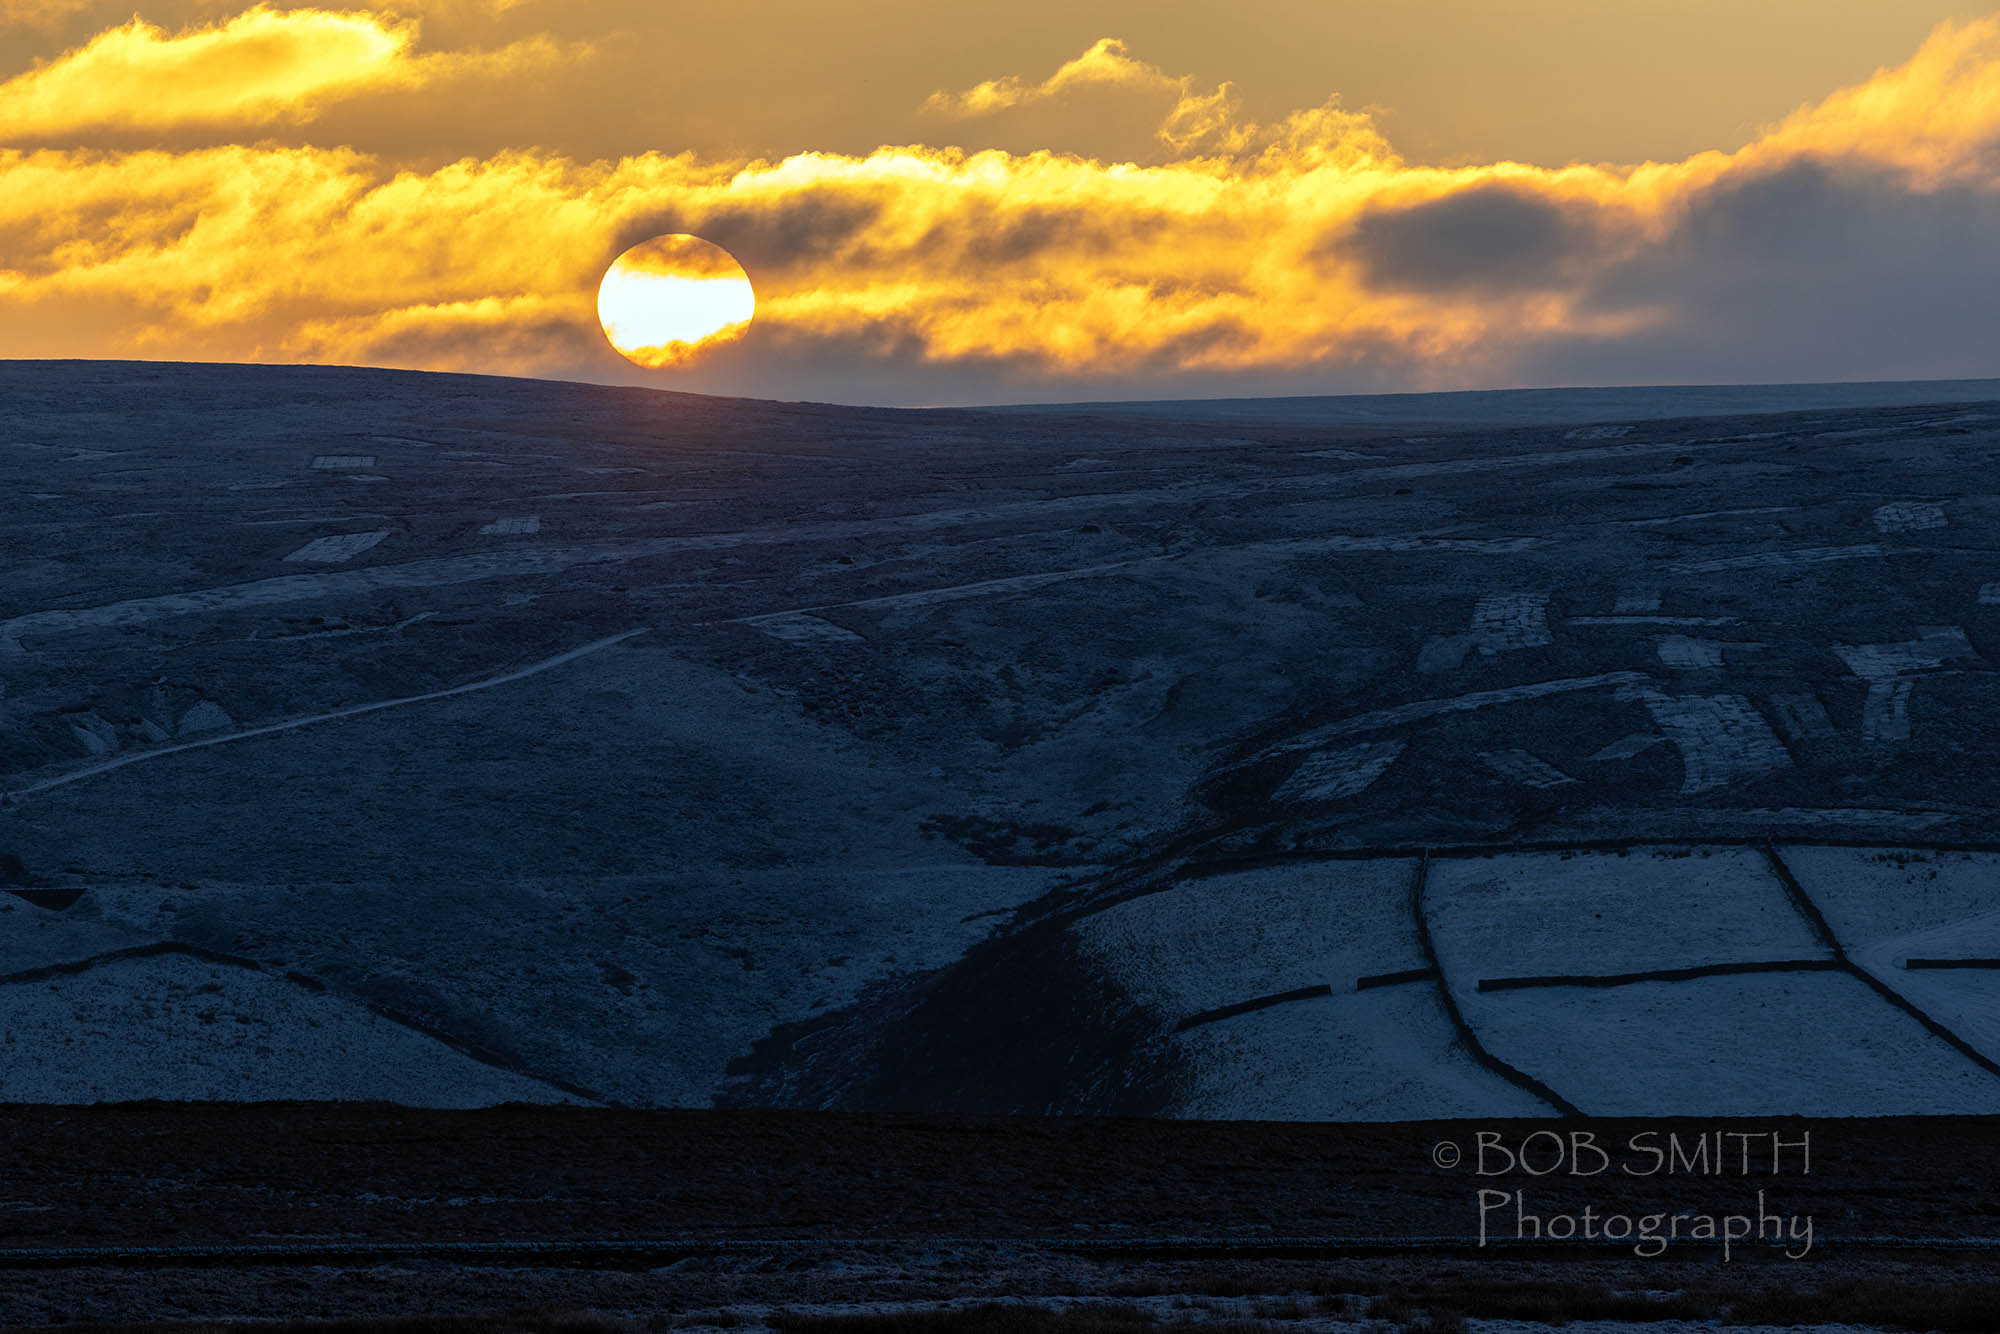 Sunset on the wintry Bronte moors. Photo: Bob Smith Photography